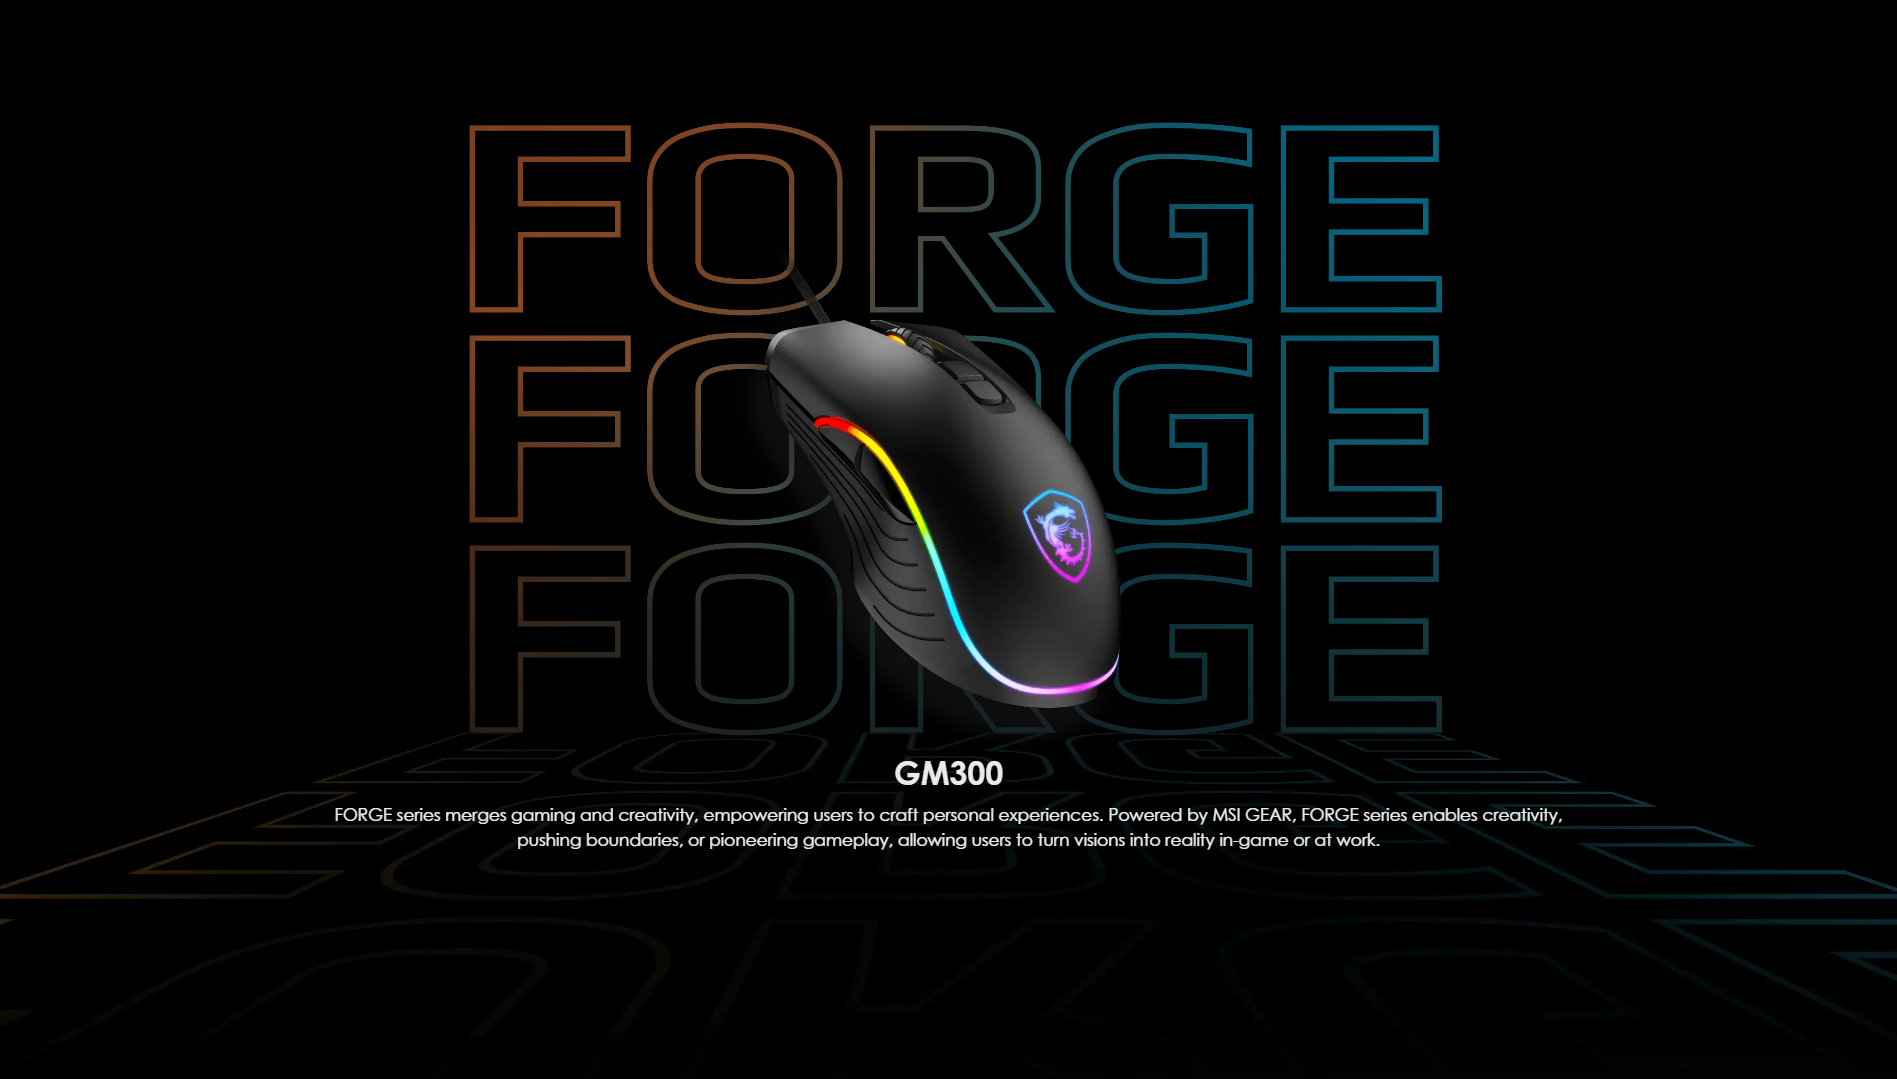 A large marketing image providing additional information about the product MSI Forge GM300 Gaming Mouse - Additional alt info not provided